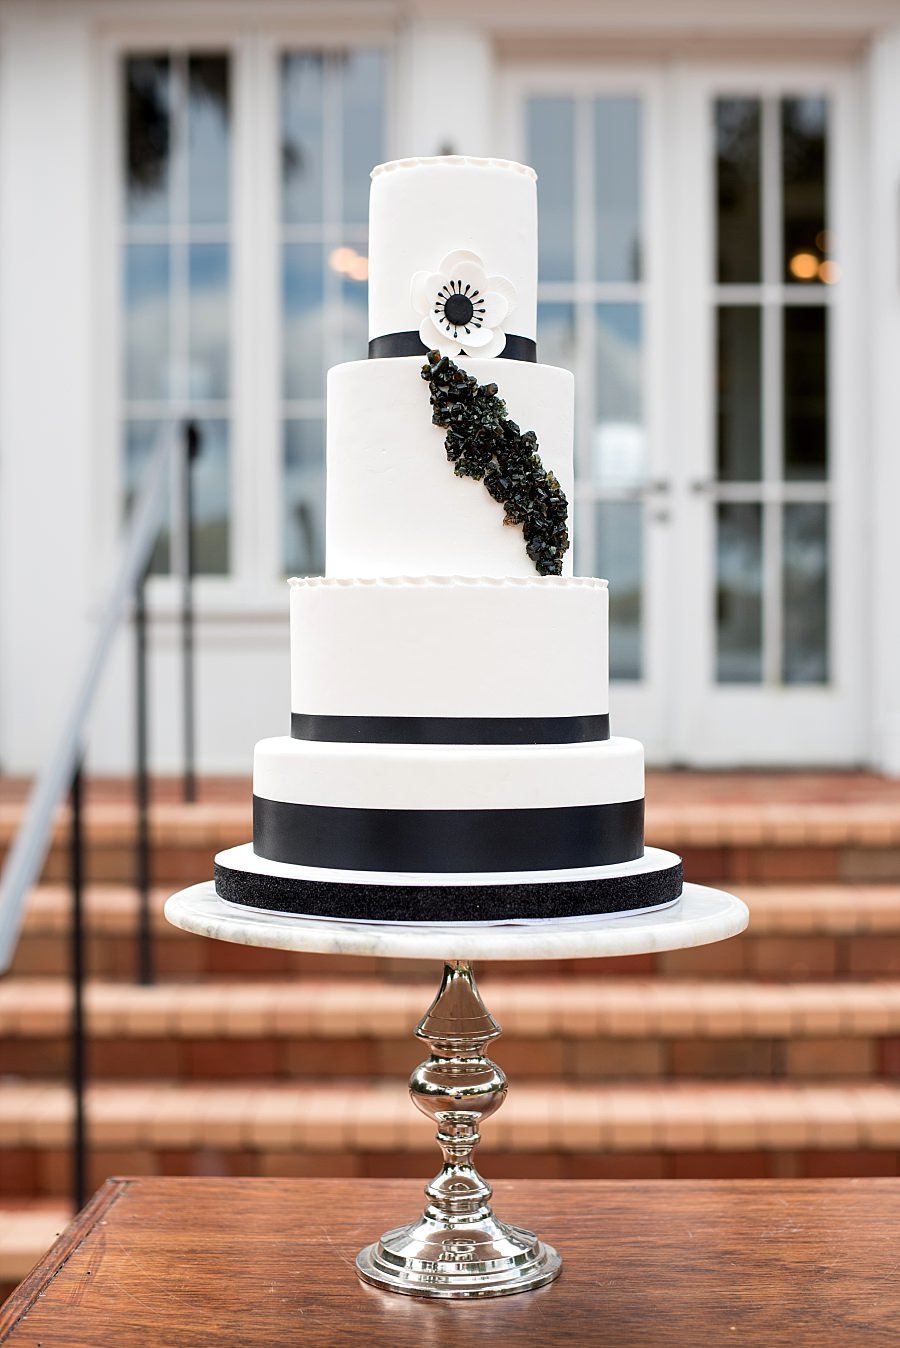 5 Tier White Fondant cake with black trimming, black rock candy cascading down it and an anemone flower